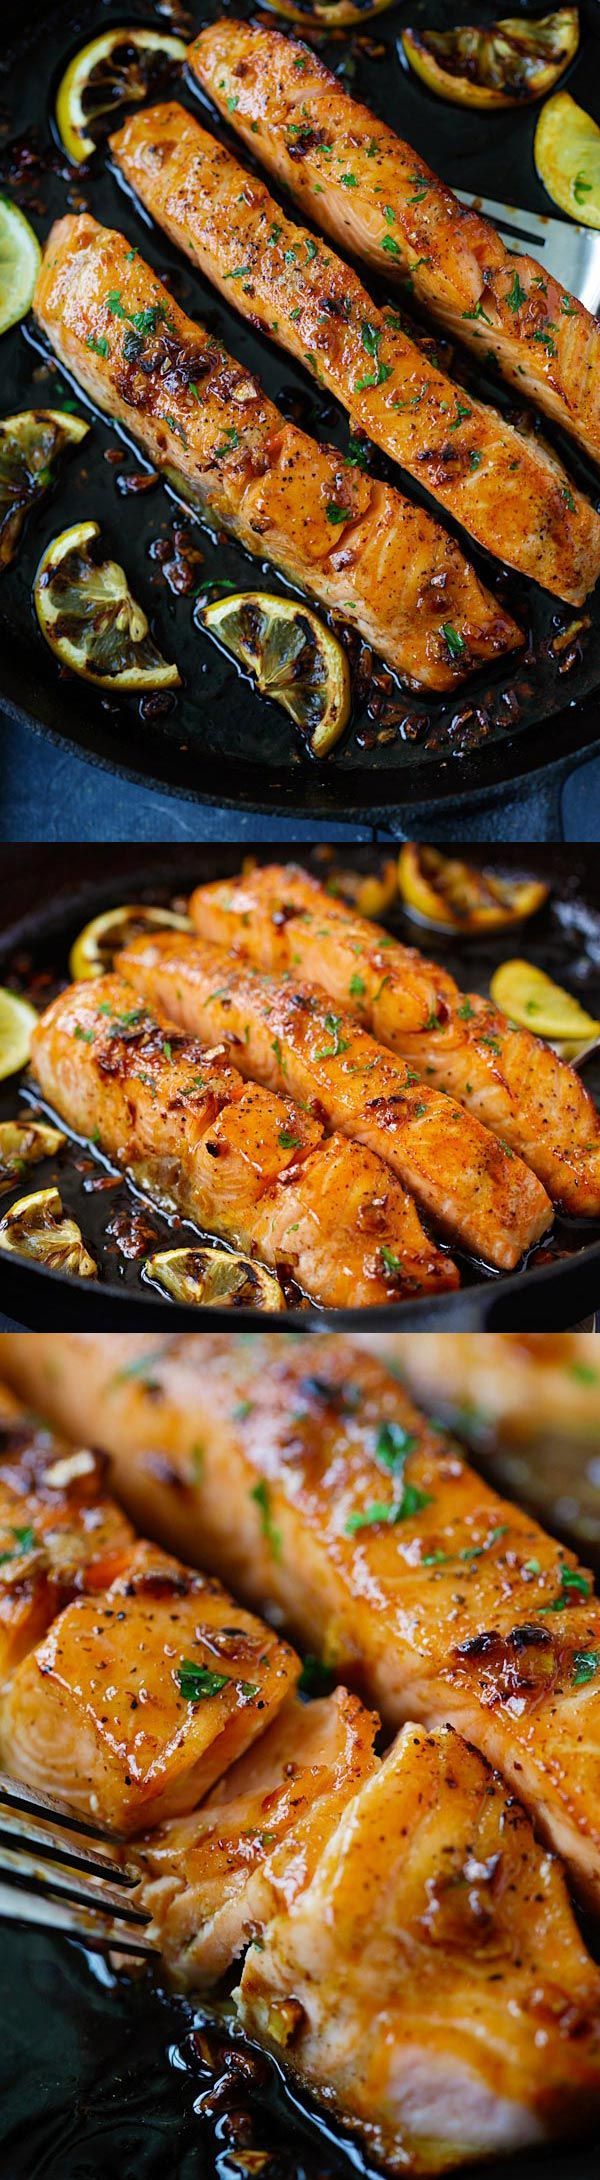 Honey Garlic Salmon – Delicious garlicky, sweet and sticky salmon with simple ingr